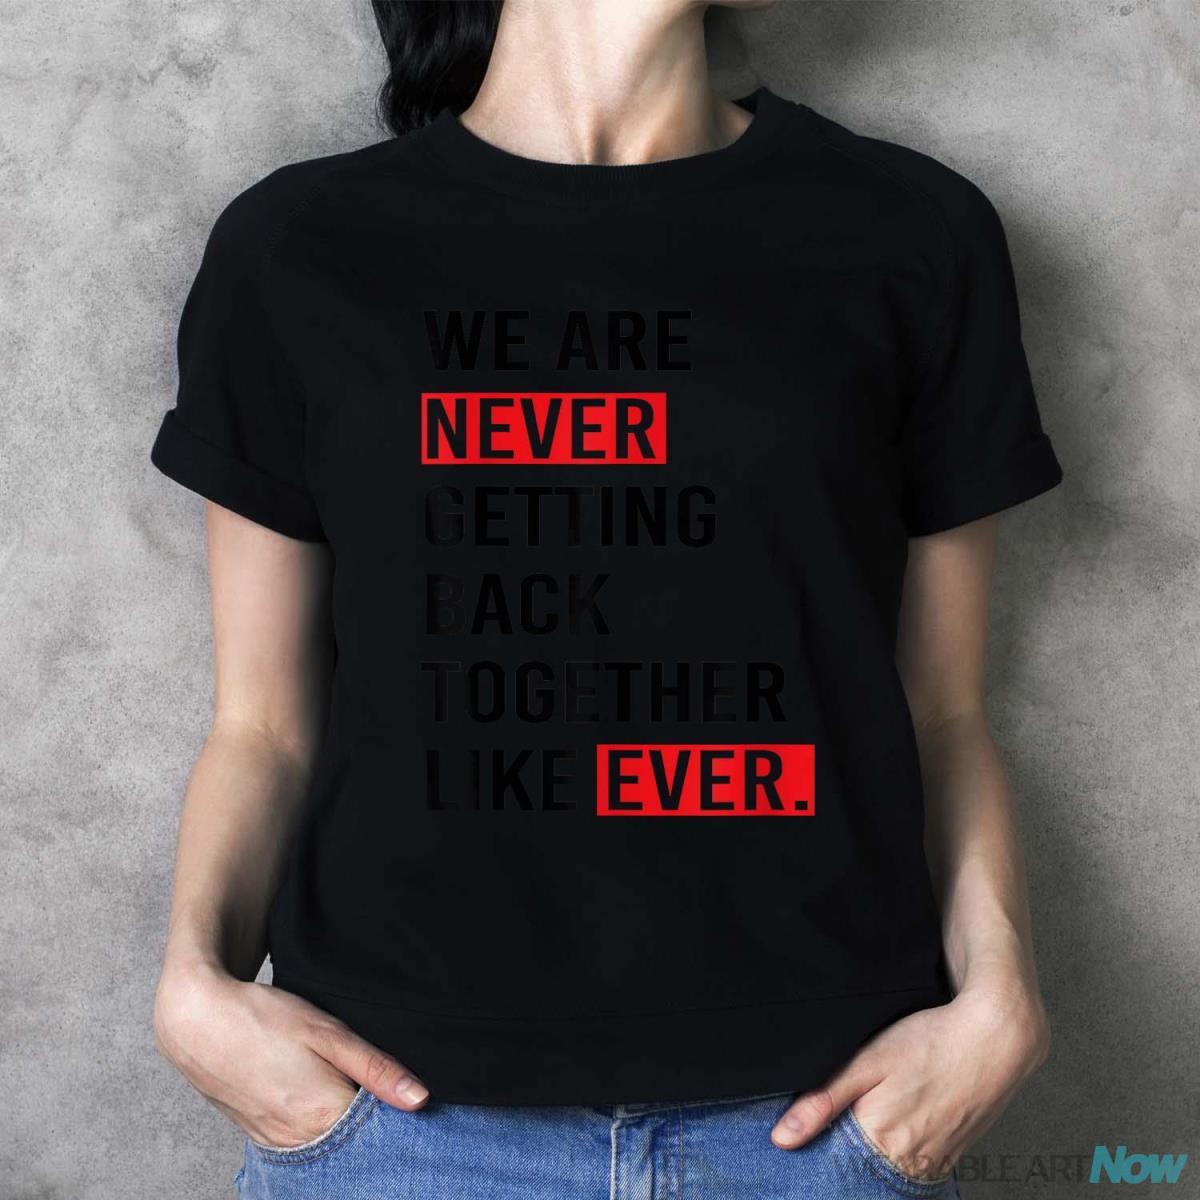 We Are Never Getting Back Together Like Ever Shirt - Ladies T-Shirt